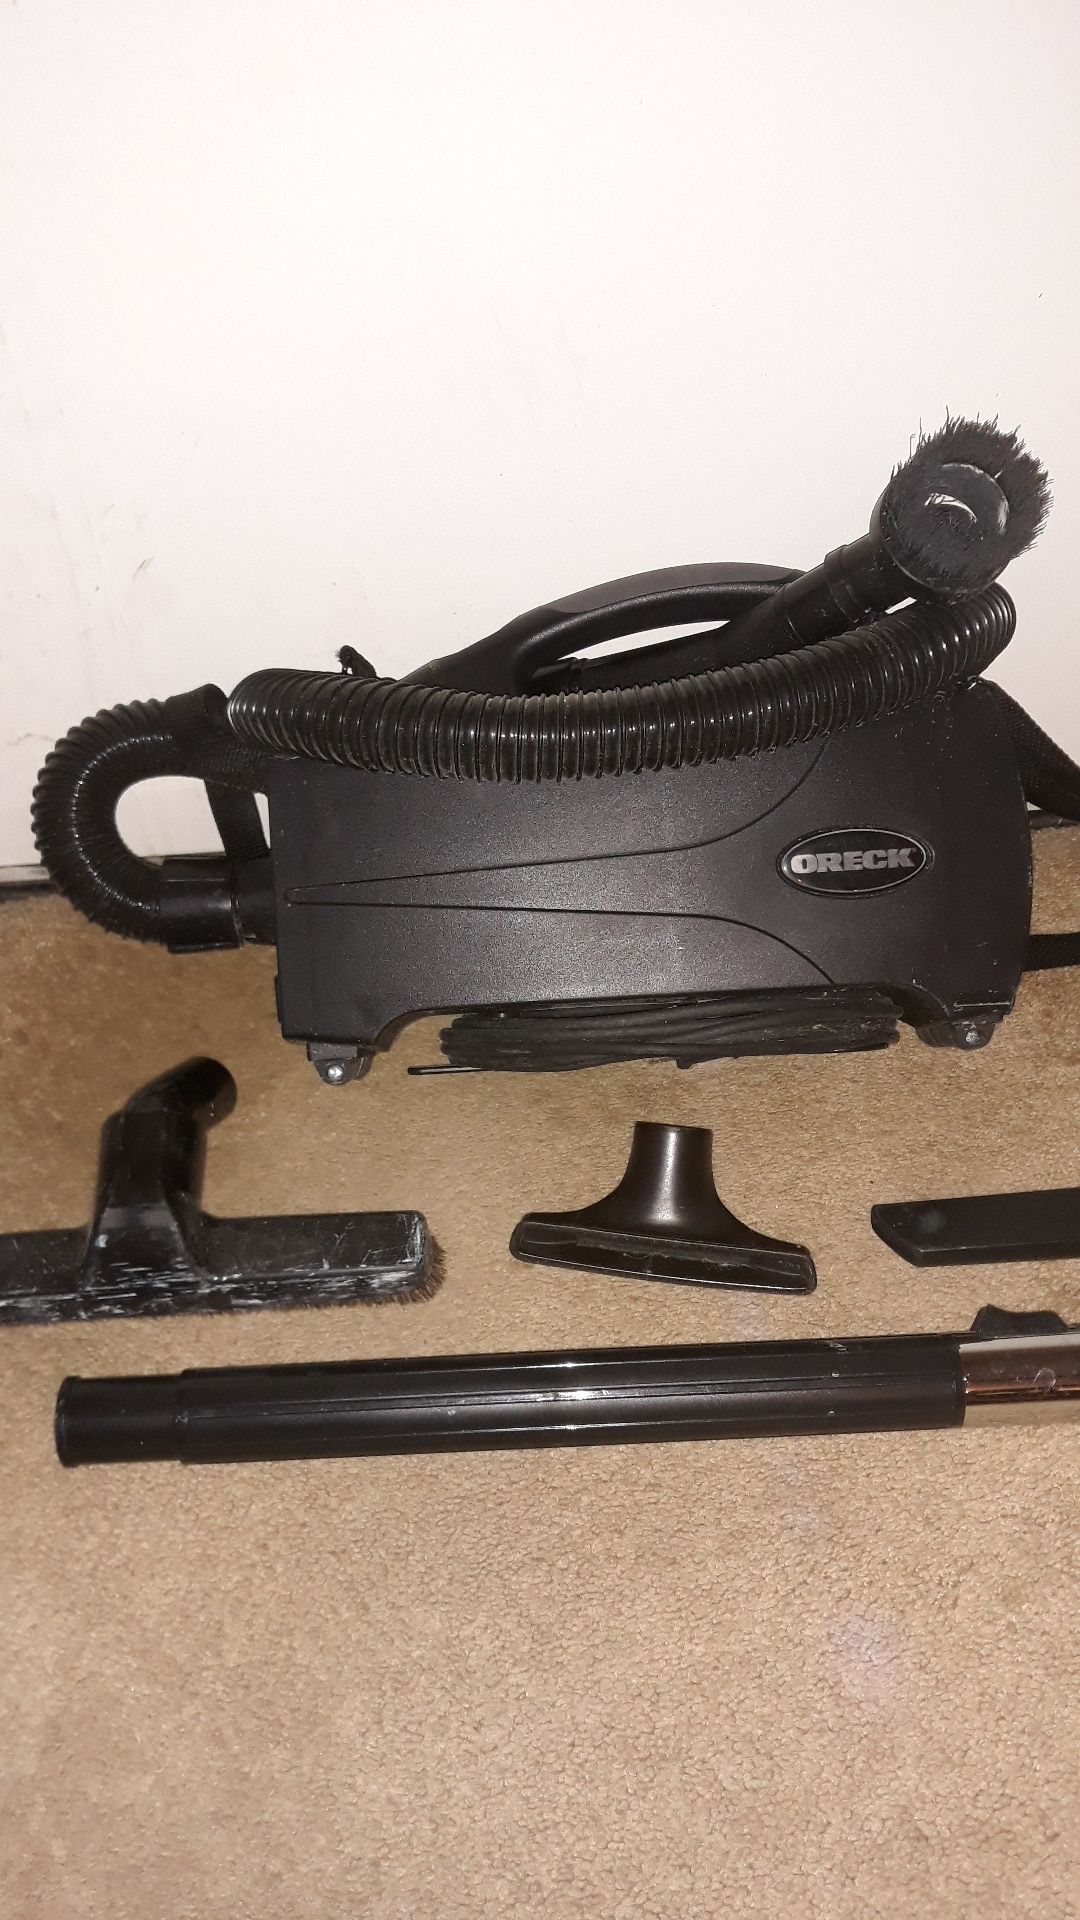 Oreck handheld small vacuum cleaner what's all attachments